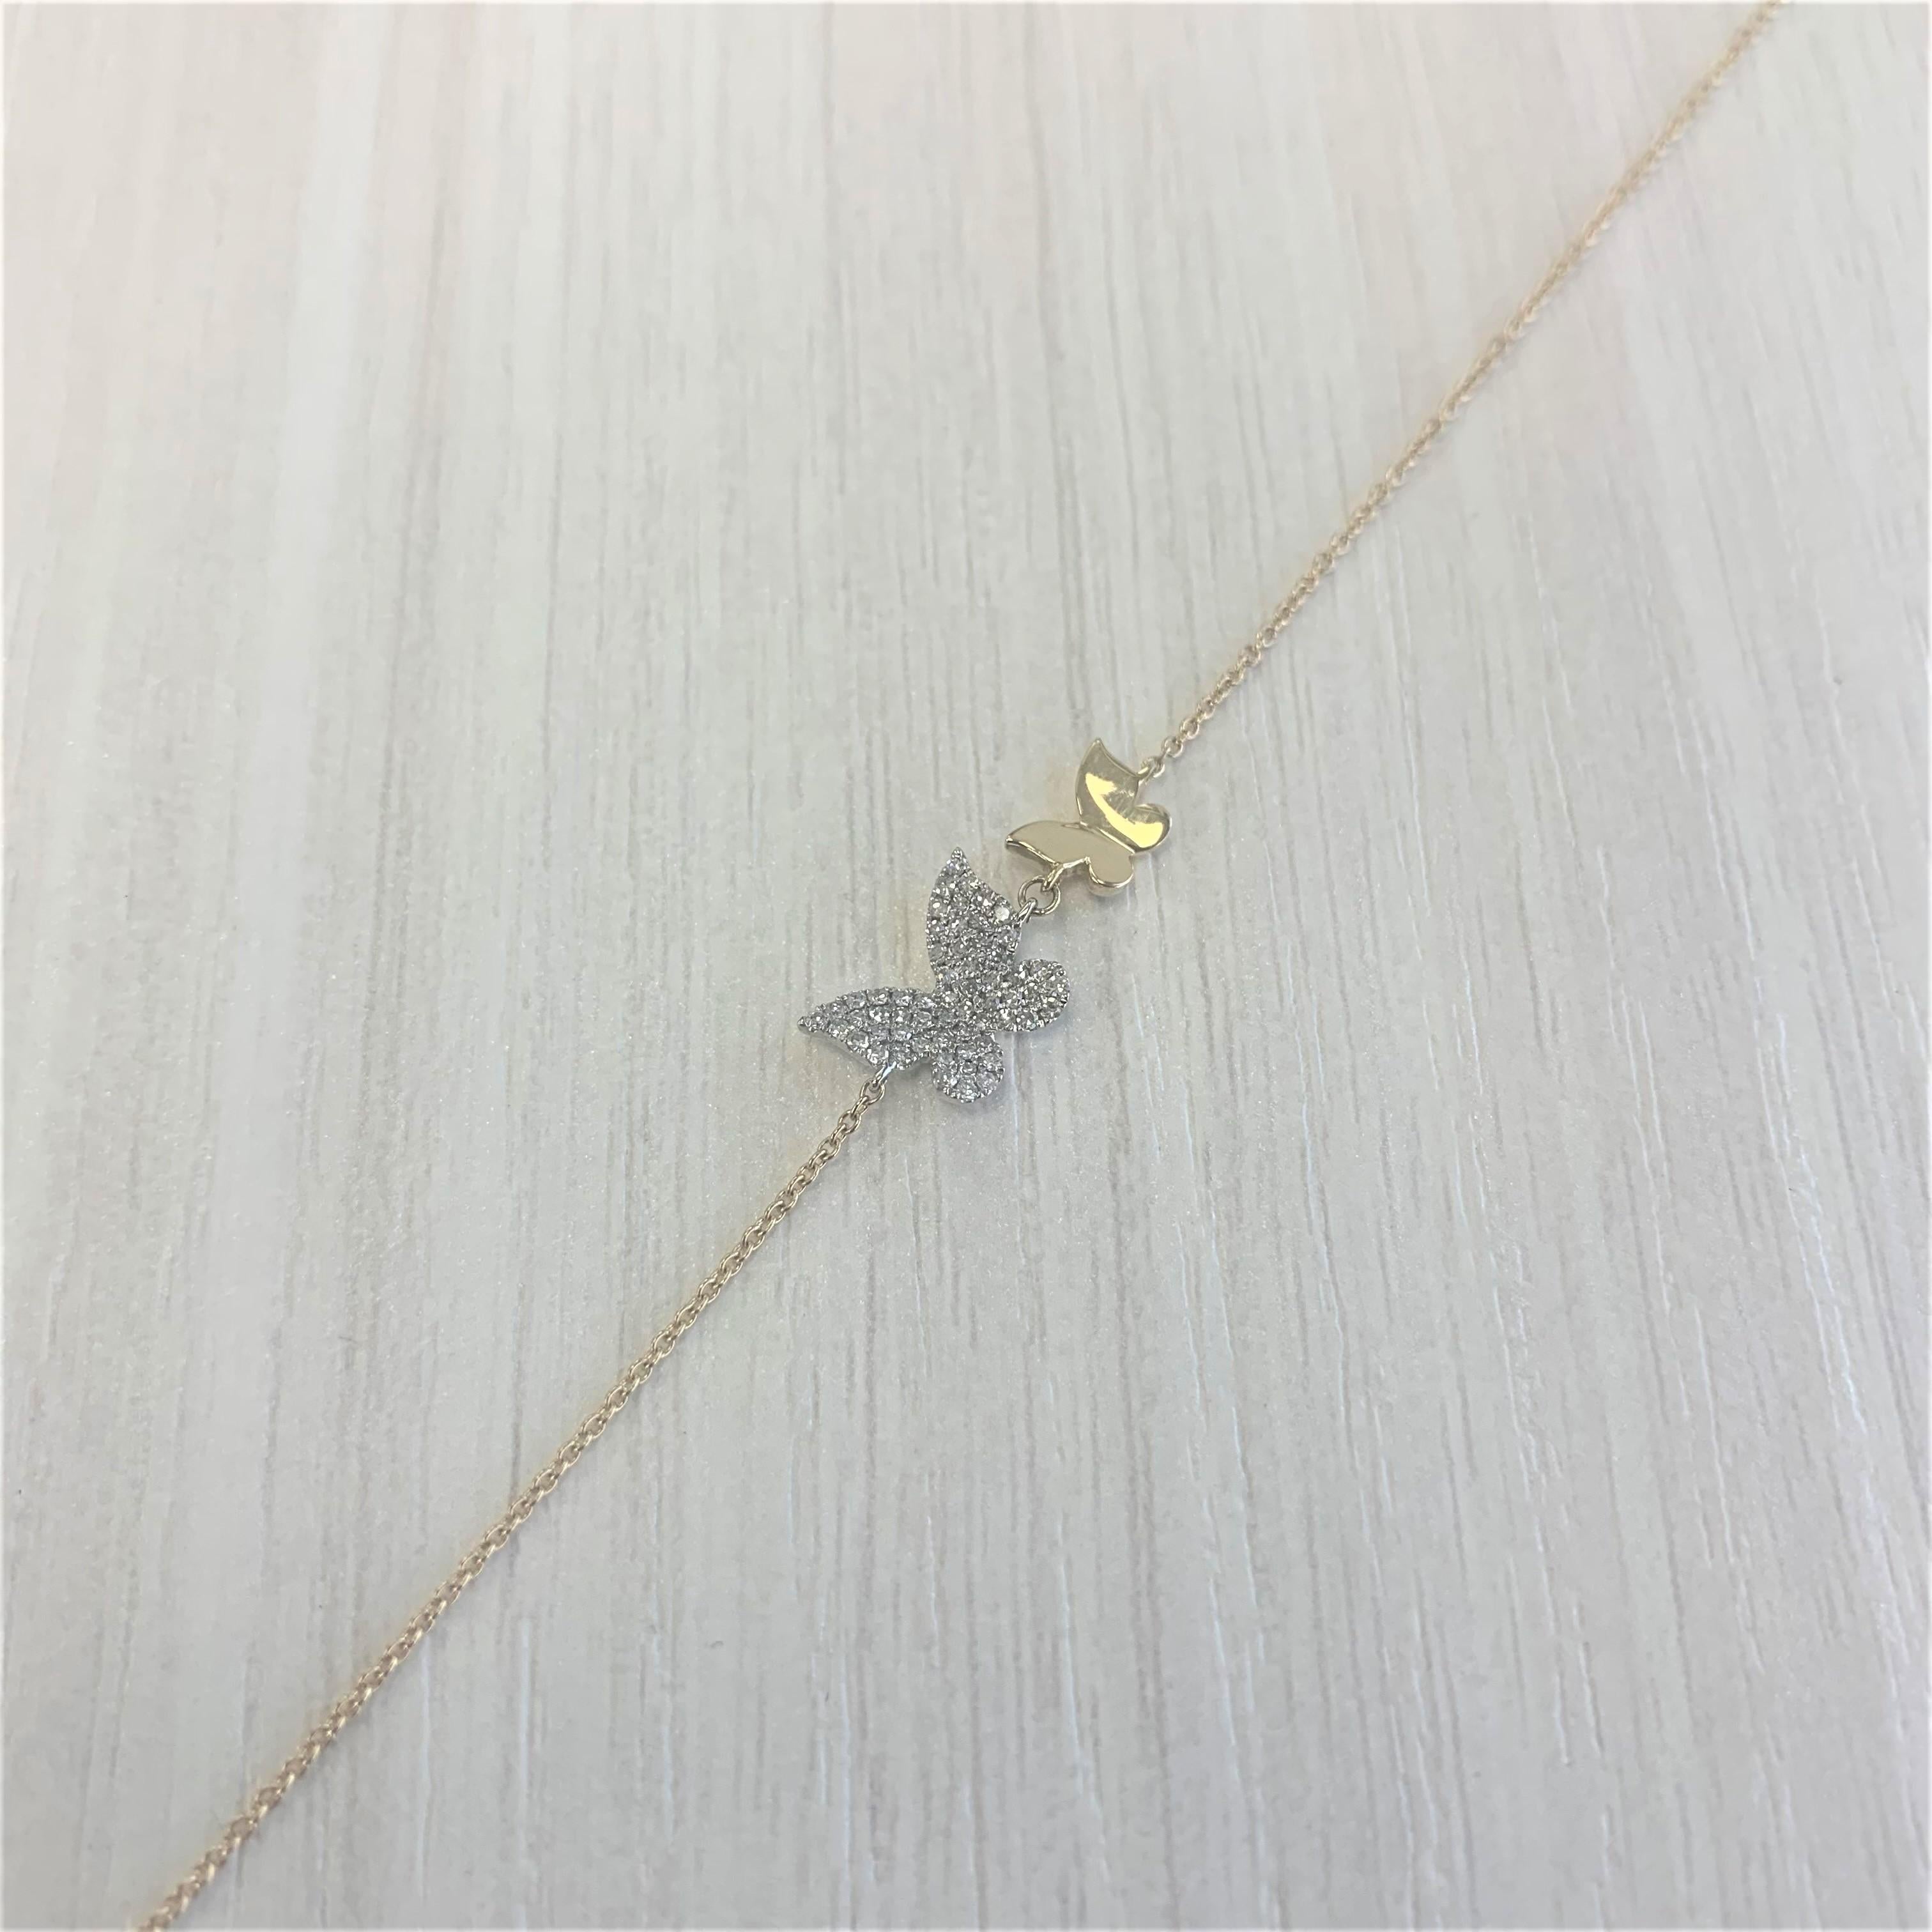 Double Butterfly Pave Chain Design Bracelet: This beautiful and eye-catching Butterfly Bracelet is made of 14K Gold and features 0.15 carats of natural round white Diamonds; the bracelet length is adjustable from 6.75